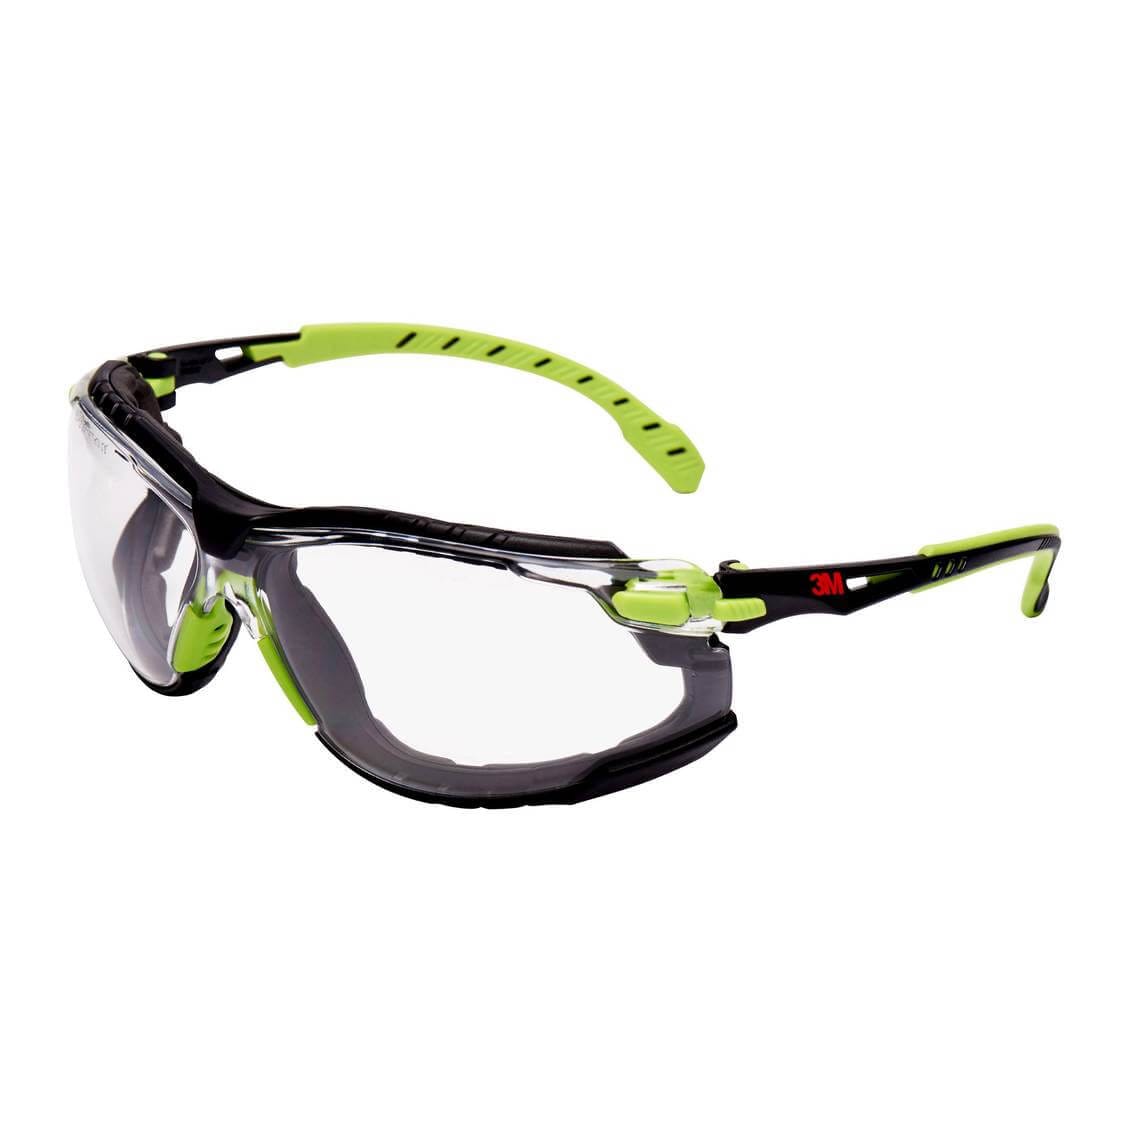 3M 1000 Solus Series Safety Spectacle